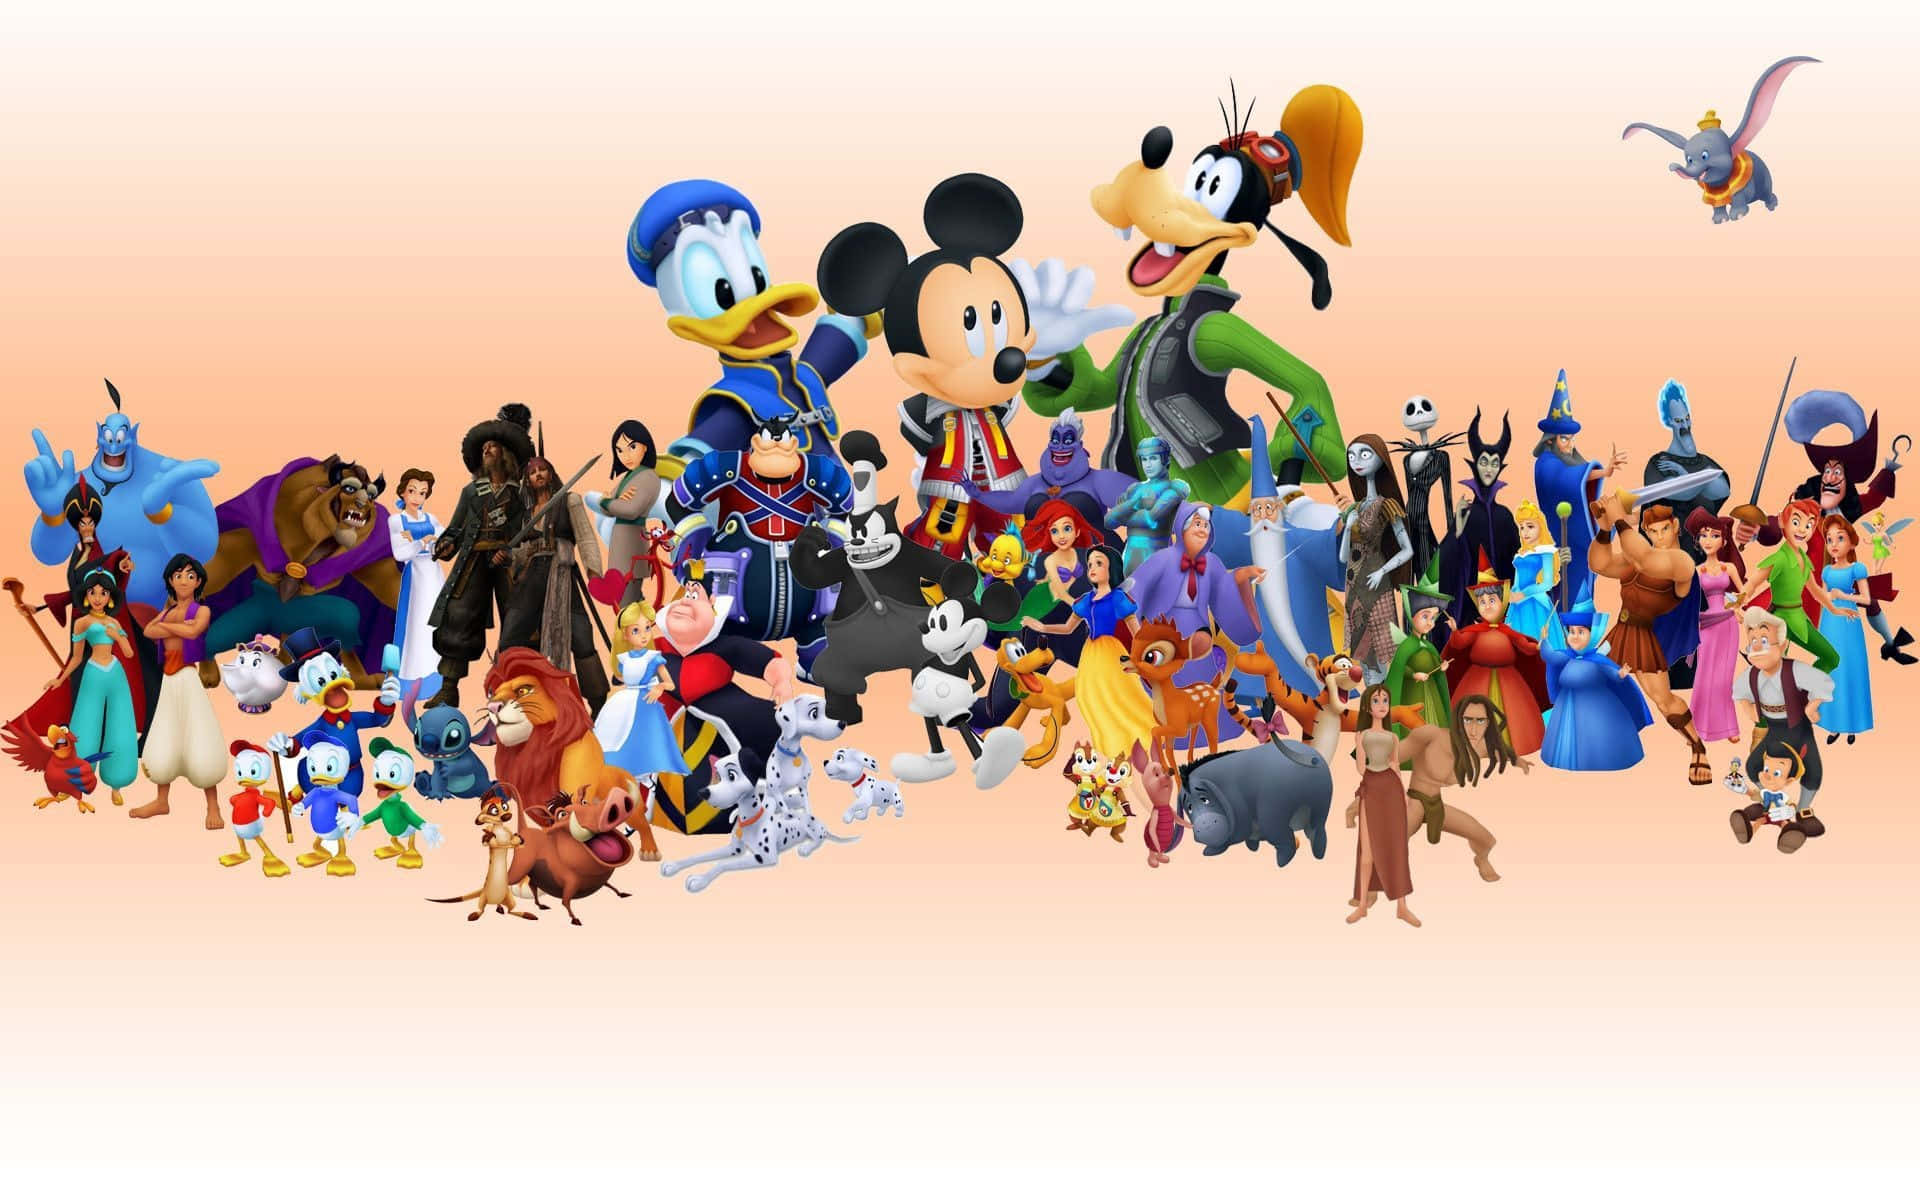 Download Disney Characters Grouped Together In A Group | Wallpapers.com